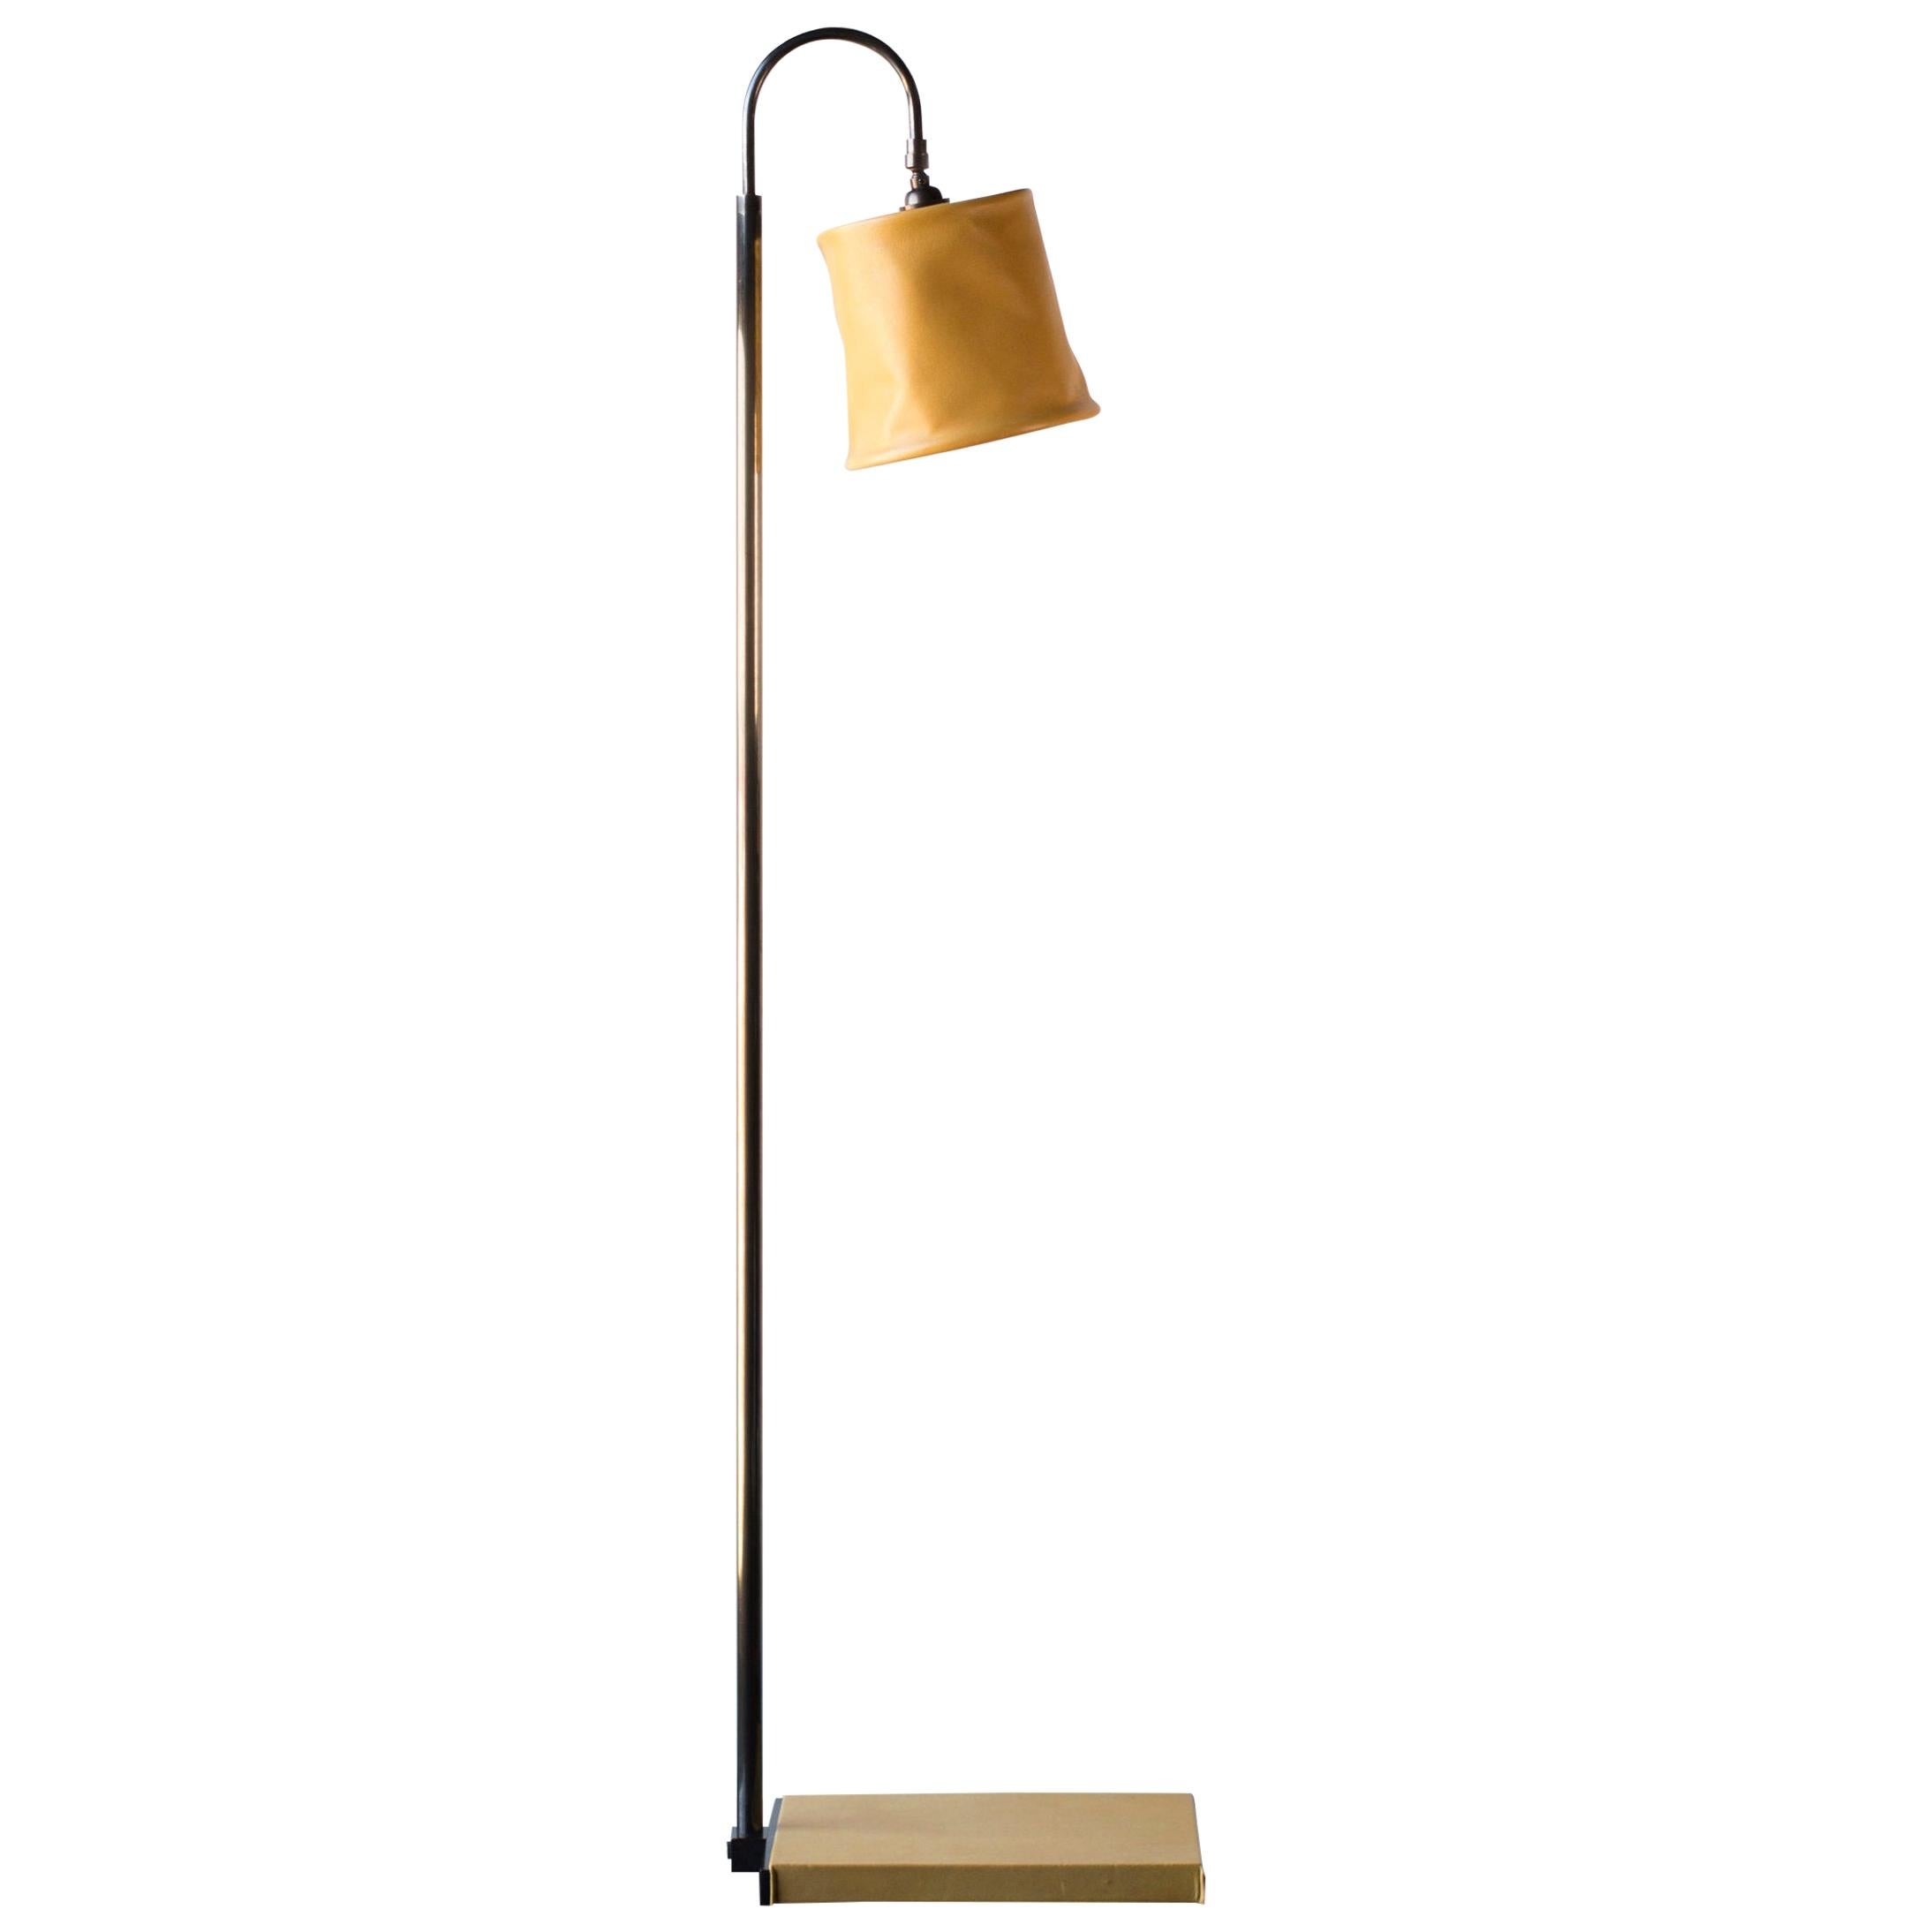 Series01 Floor Lamp, Hand-Dyed Mustard Yellow Leather, Dark Patinated Brass For Sale